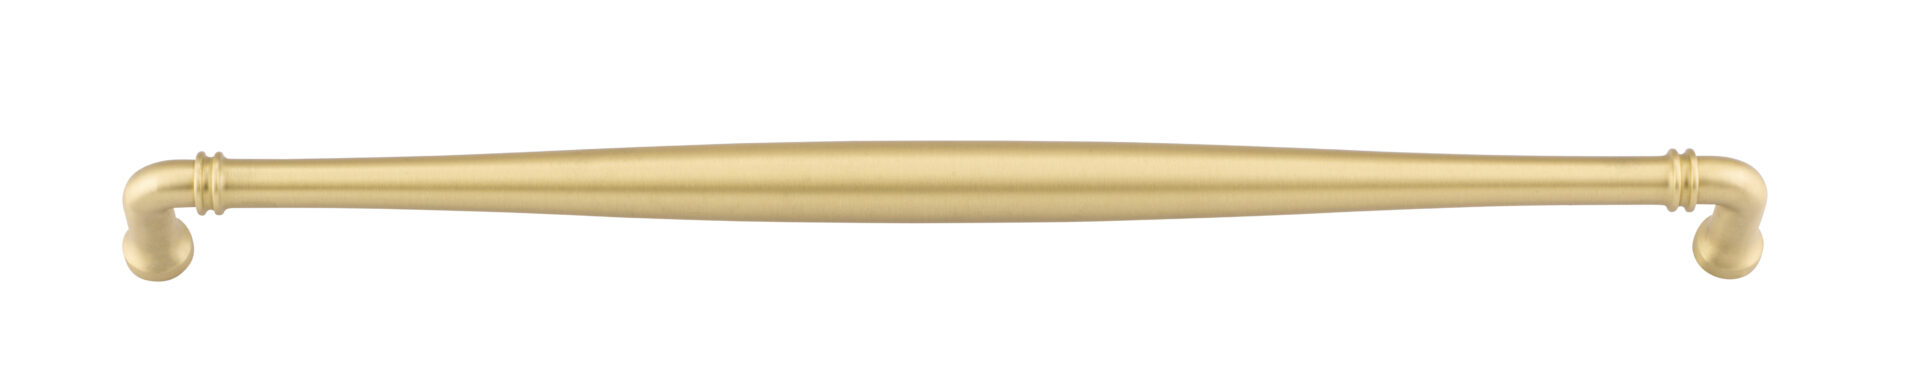 17108 - Sarlat Cabinet Pull - CTC450mm - Brushed Gold PVD